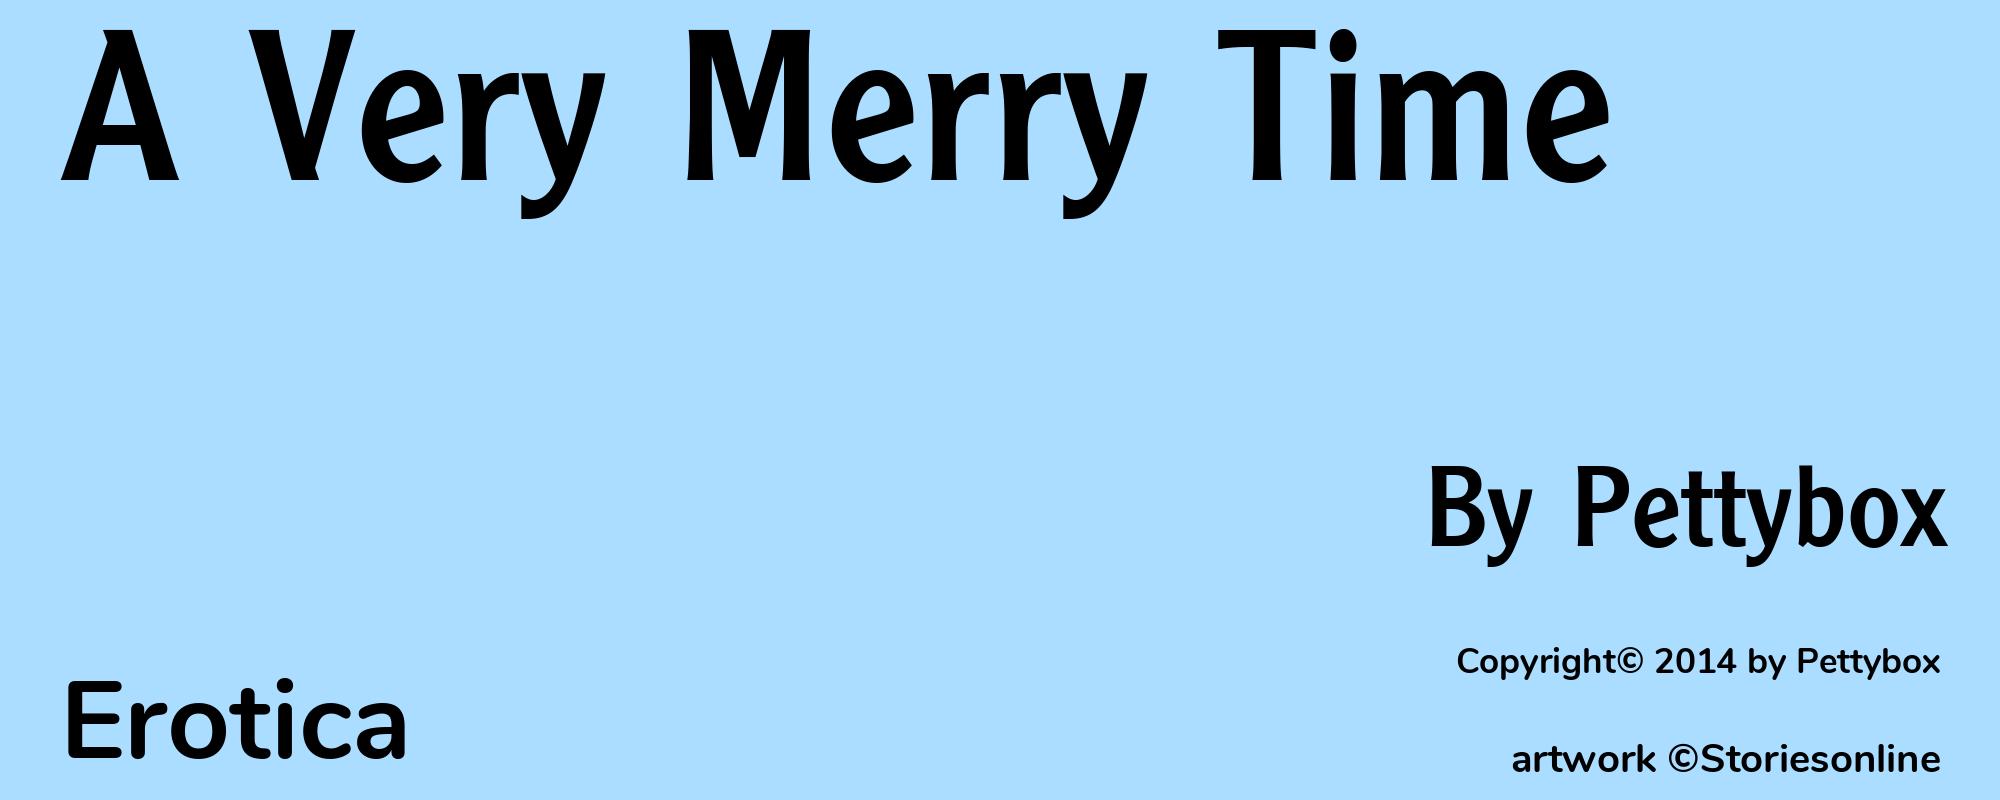 A Very Merry Time - Cover